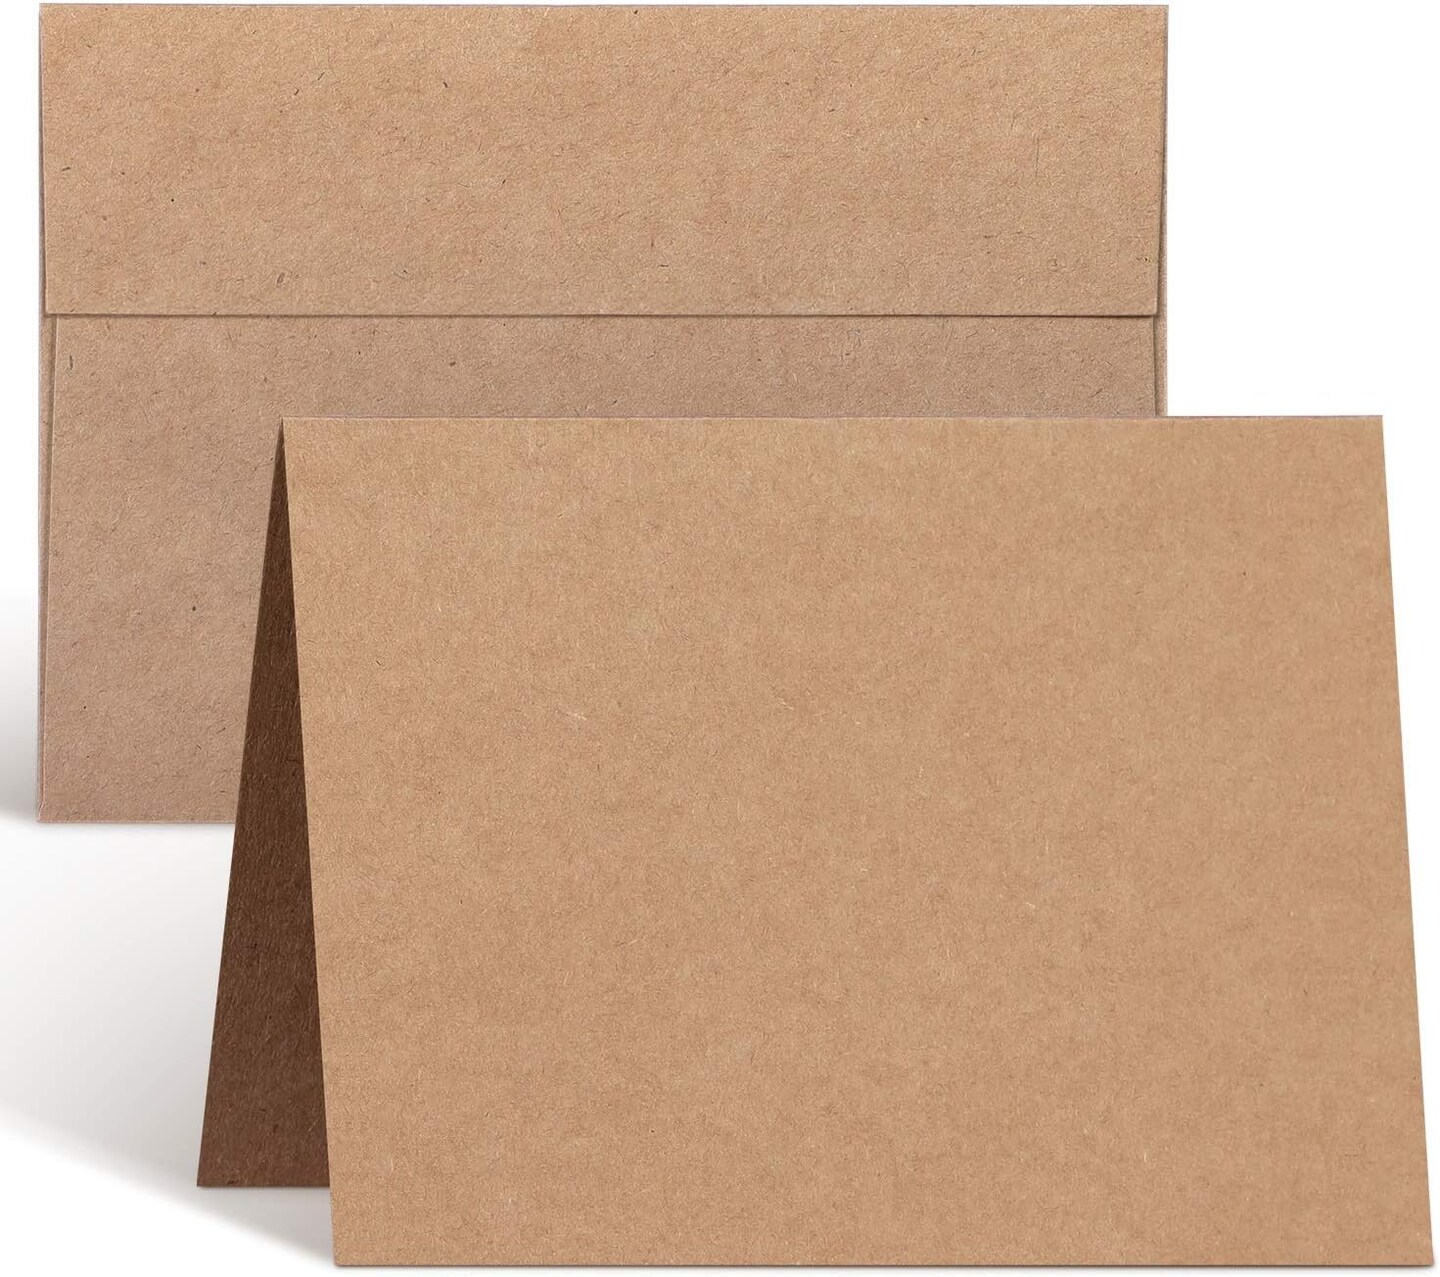 Blank Cards and Envelopes 100 Pack, Ohuhu 5 x 7 Heavyweight Kraft Paper  Folded Cardstock and A7 Envelopes for DIY Greeting Cards, Wedding,  Birthday